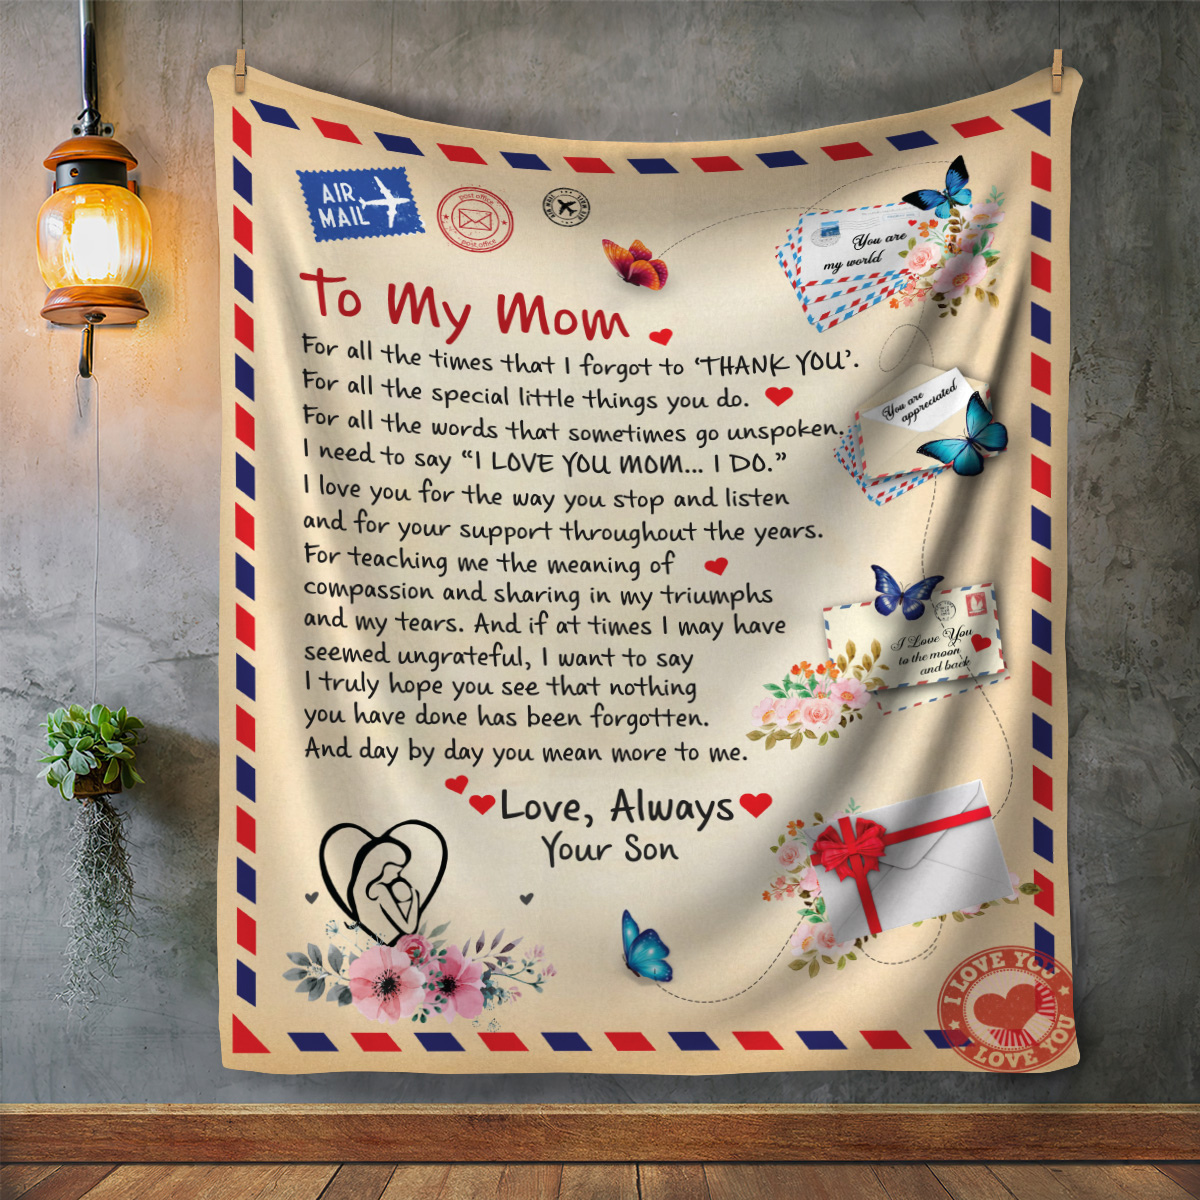 Mom - Giant Post Card Blanket - From Son cc1